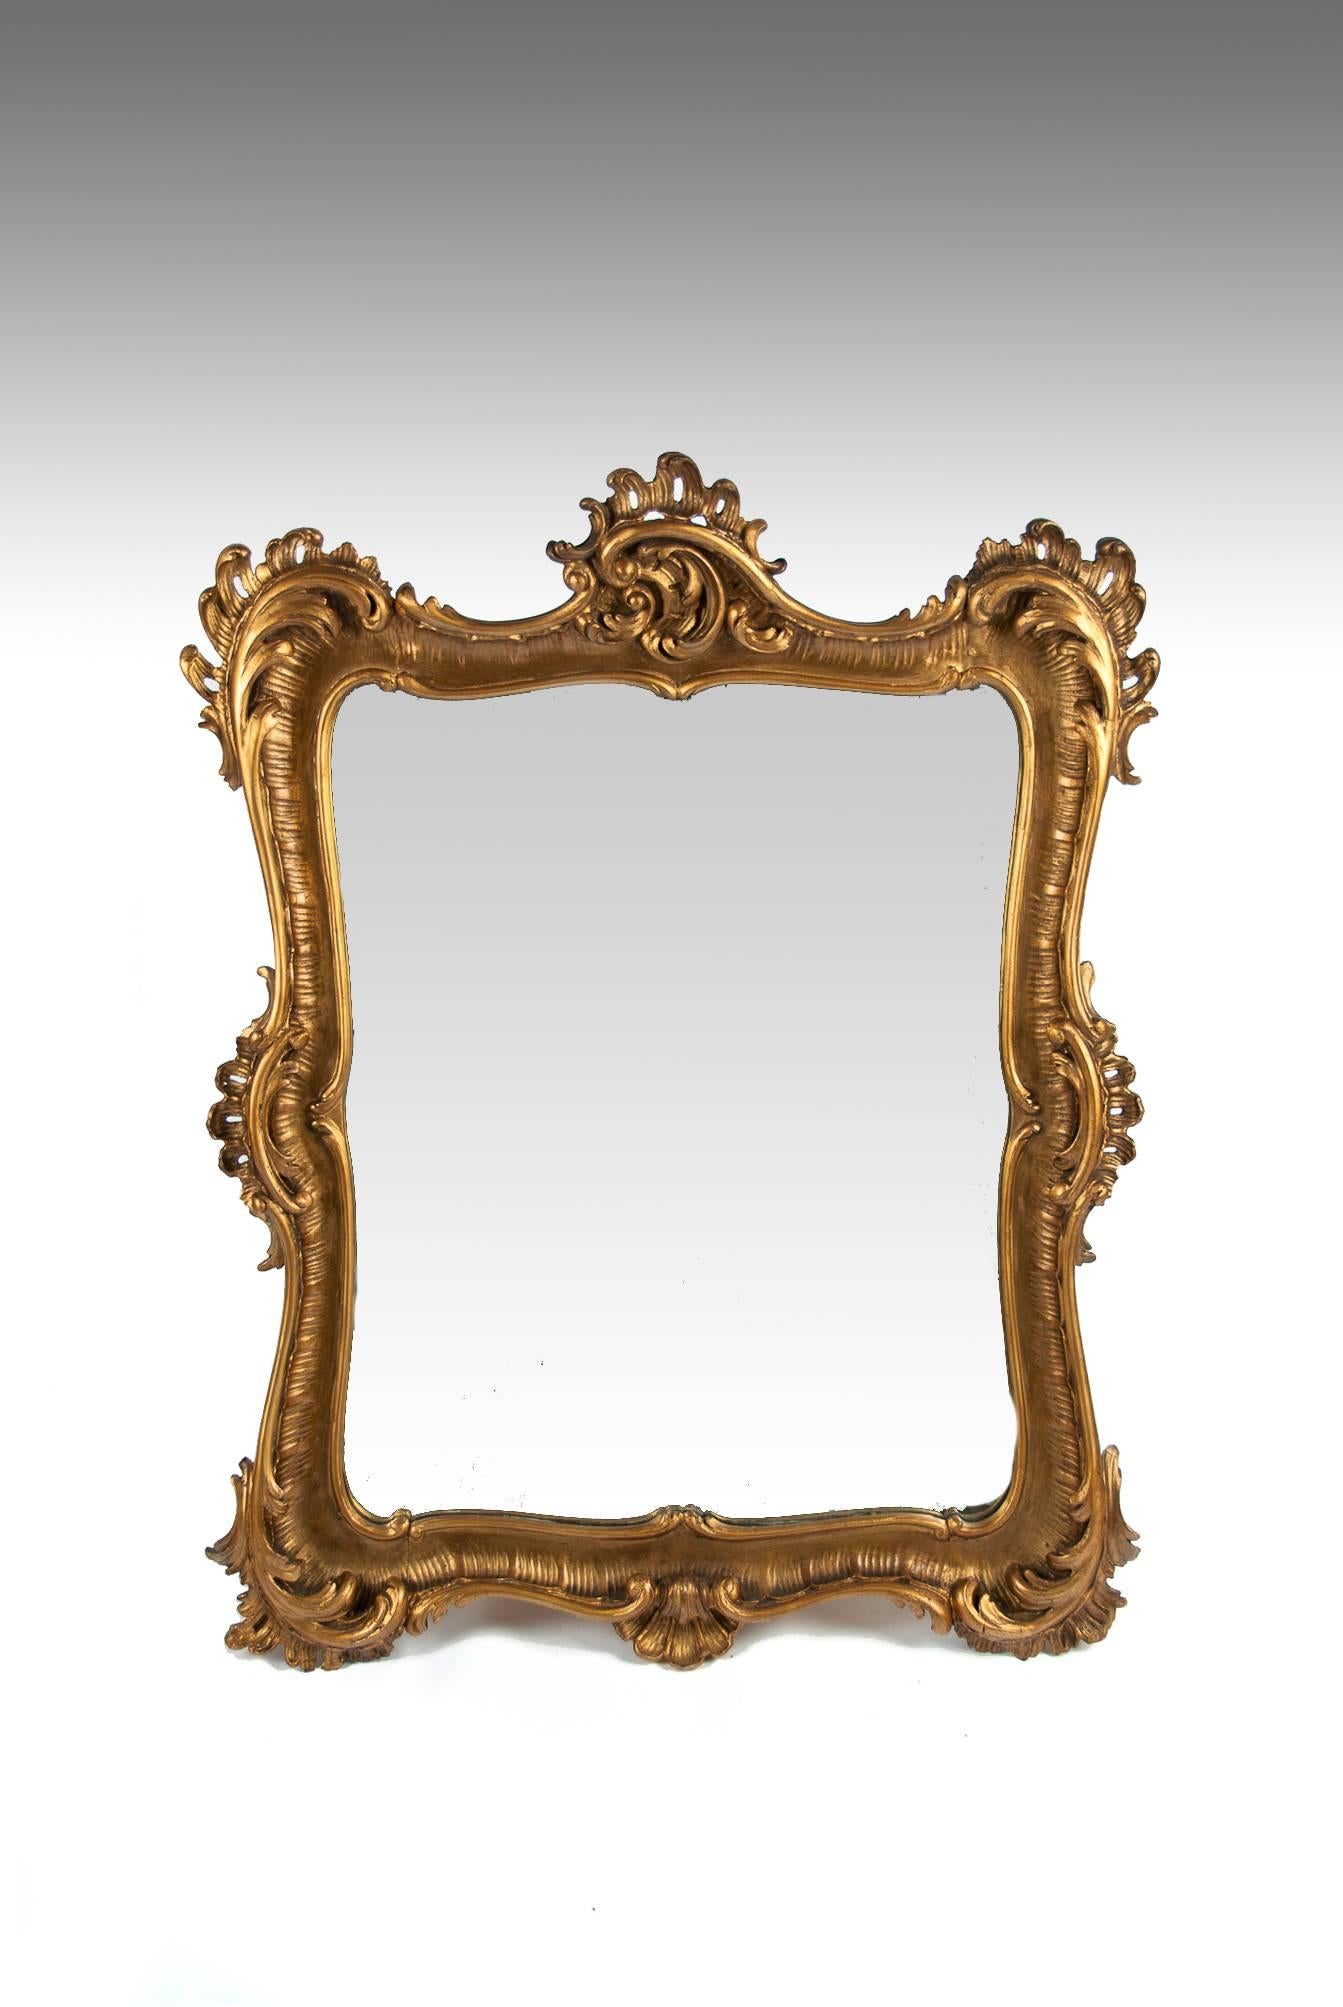 A finely carved and decorative 19th Century giltwood mirror circa 1860.
A very well carved shaped gilt wood hanging wall mirror of good proportions having carved foliage and shell decoration to each corner and centres.
In excellent condition having